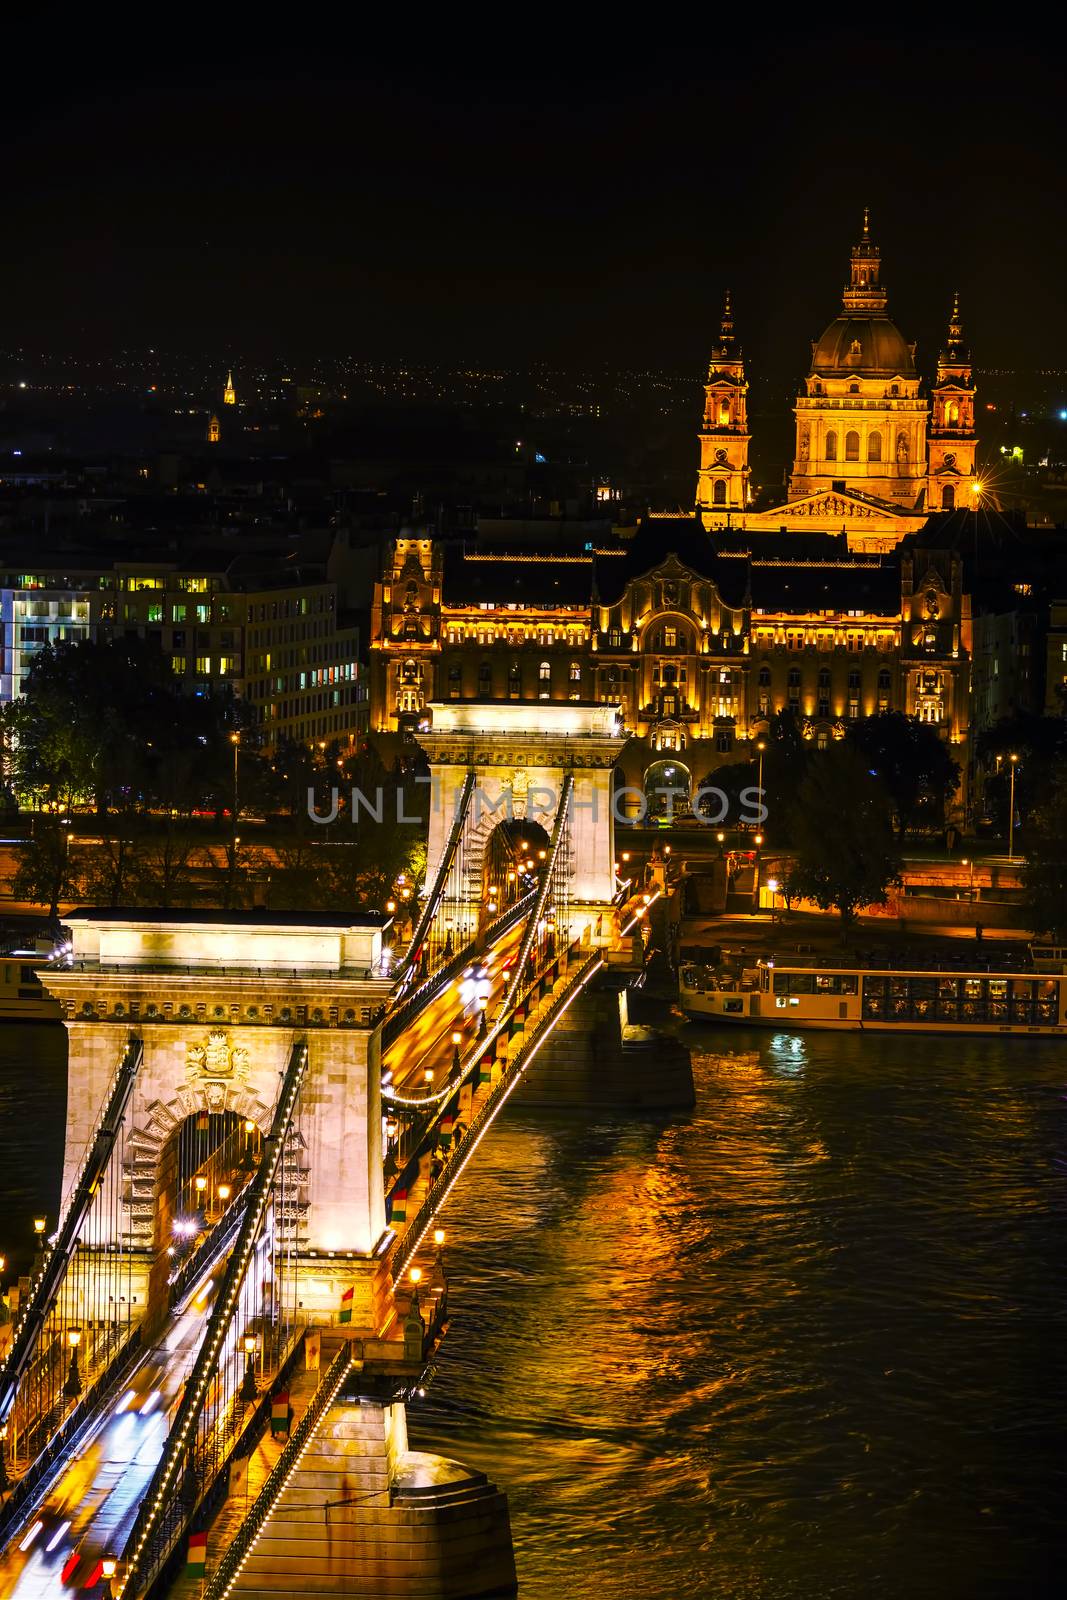 Overview of Budapest at night by AndreyKr